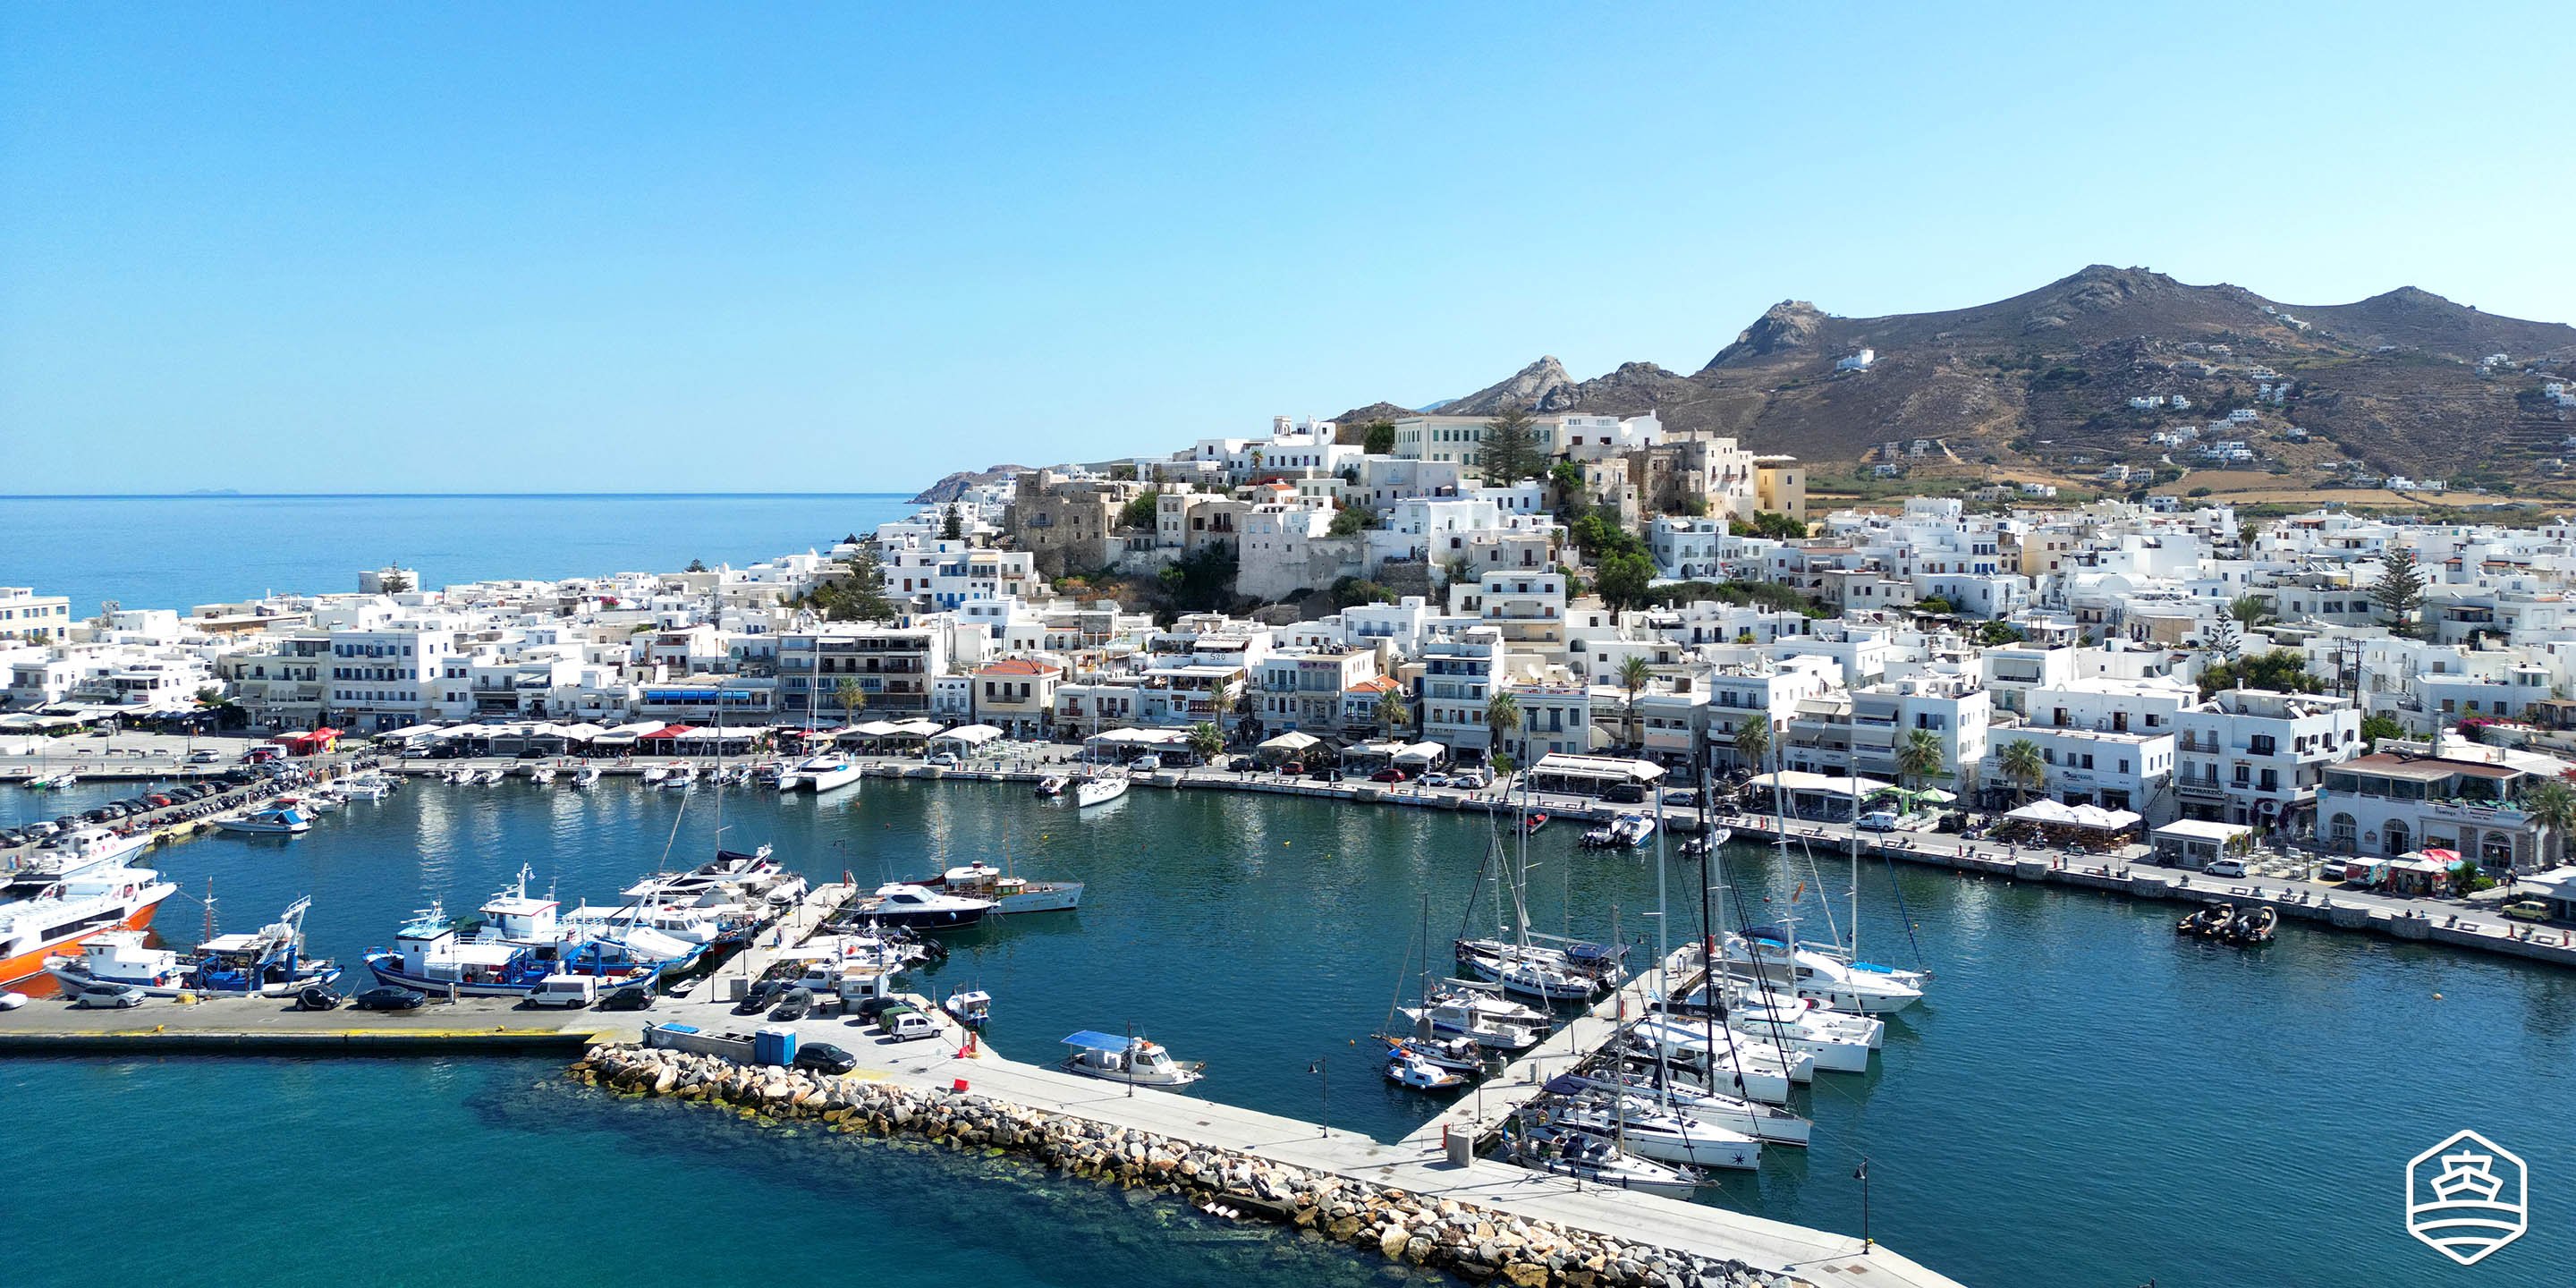 Aerial drone view of the town and port of Naxos island